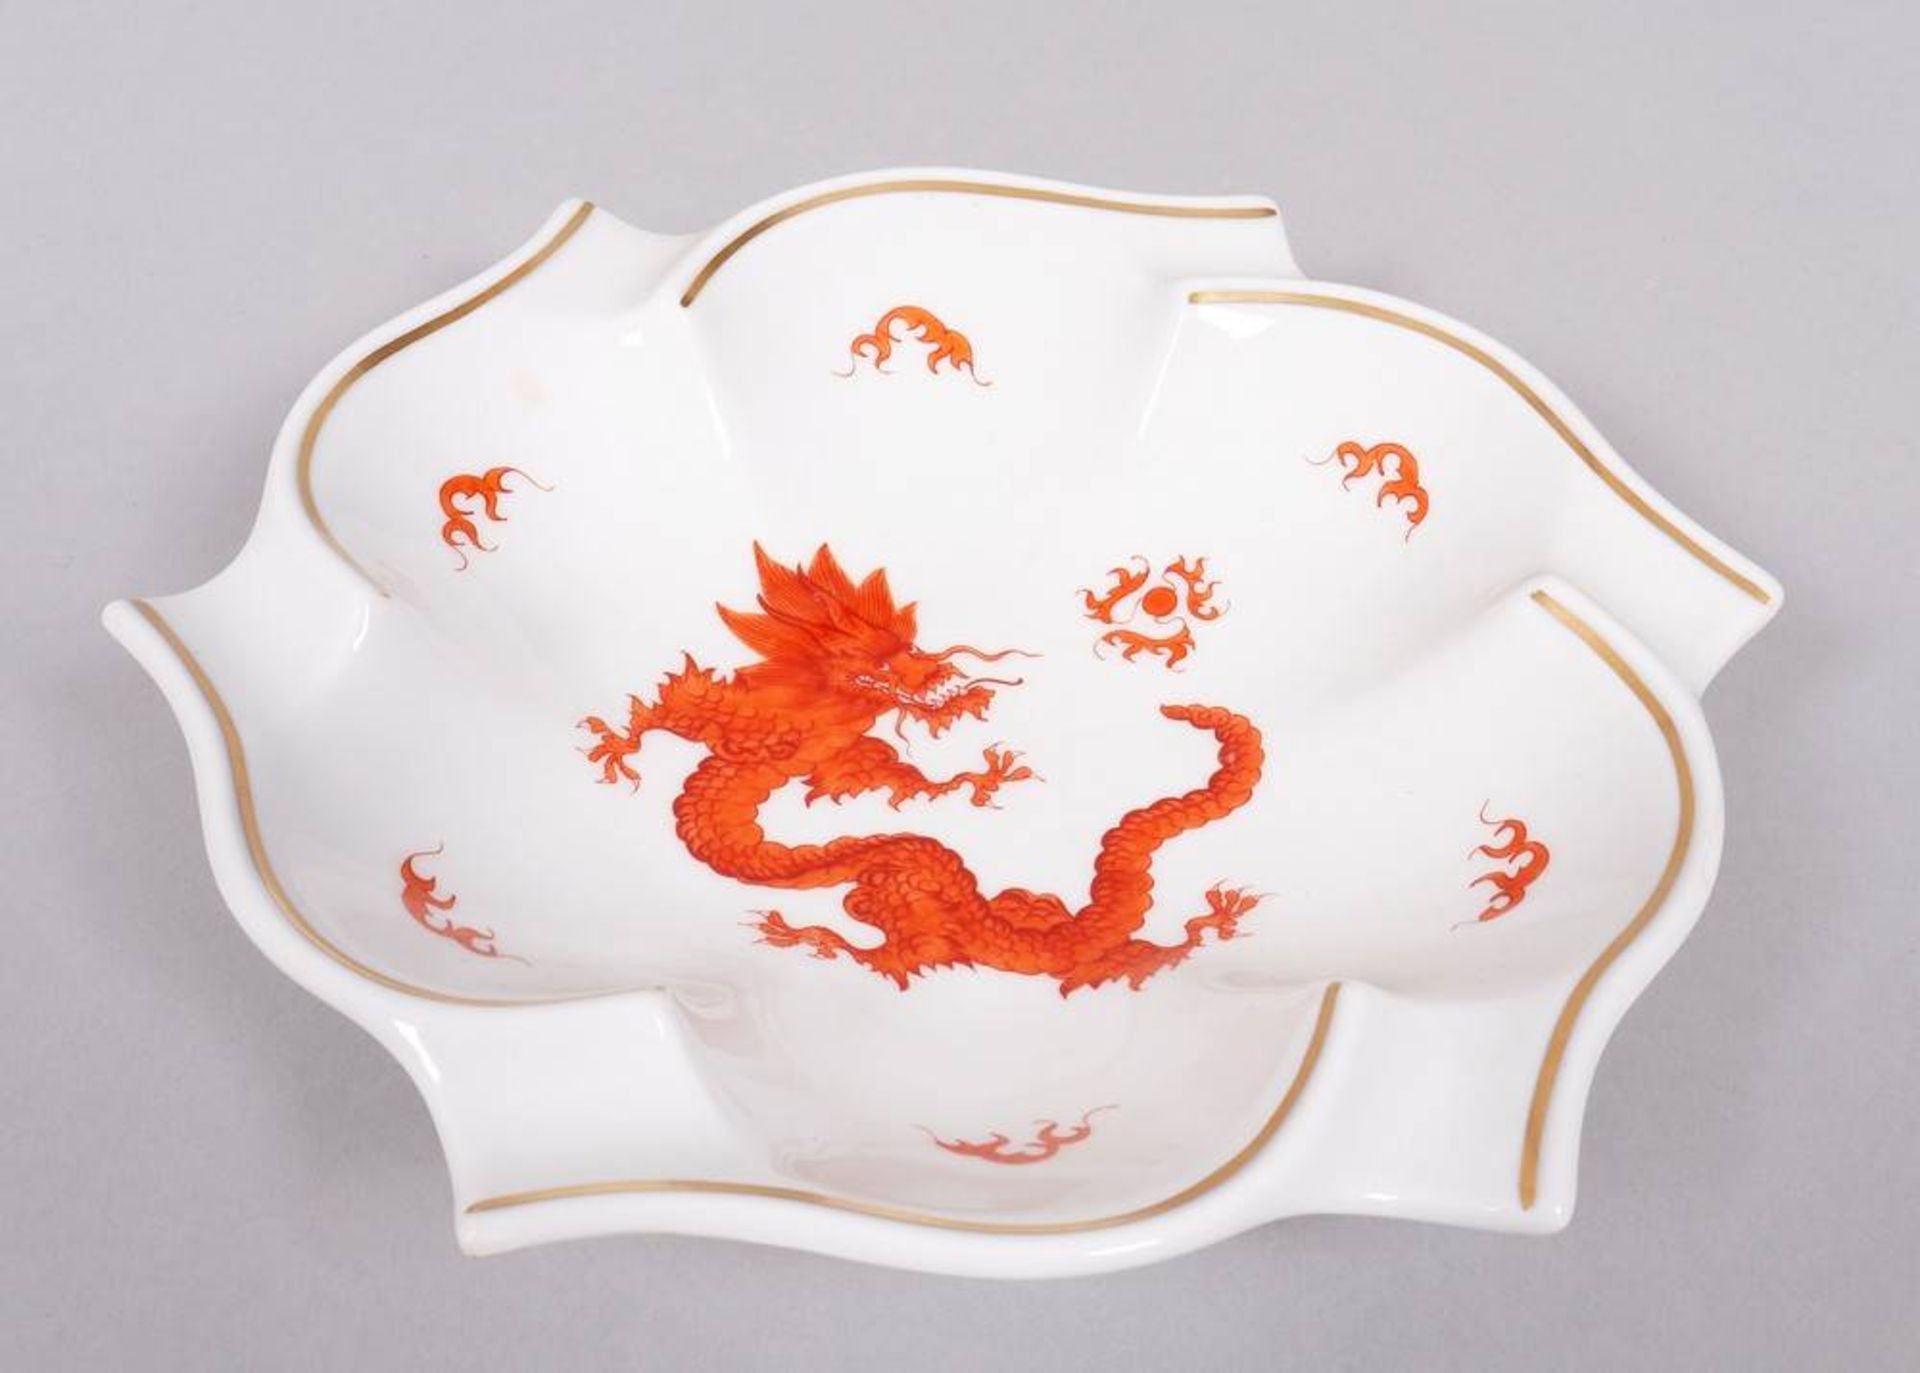 2 dishes, Meissen, mid-20th C., "Roter Drache" decor - Image 5 of 6